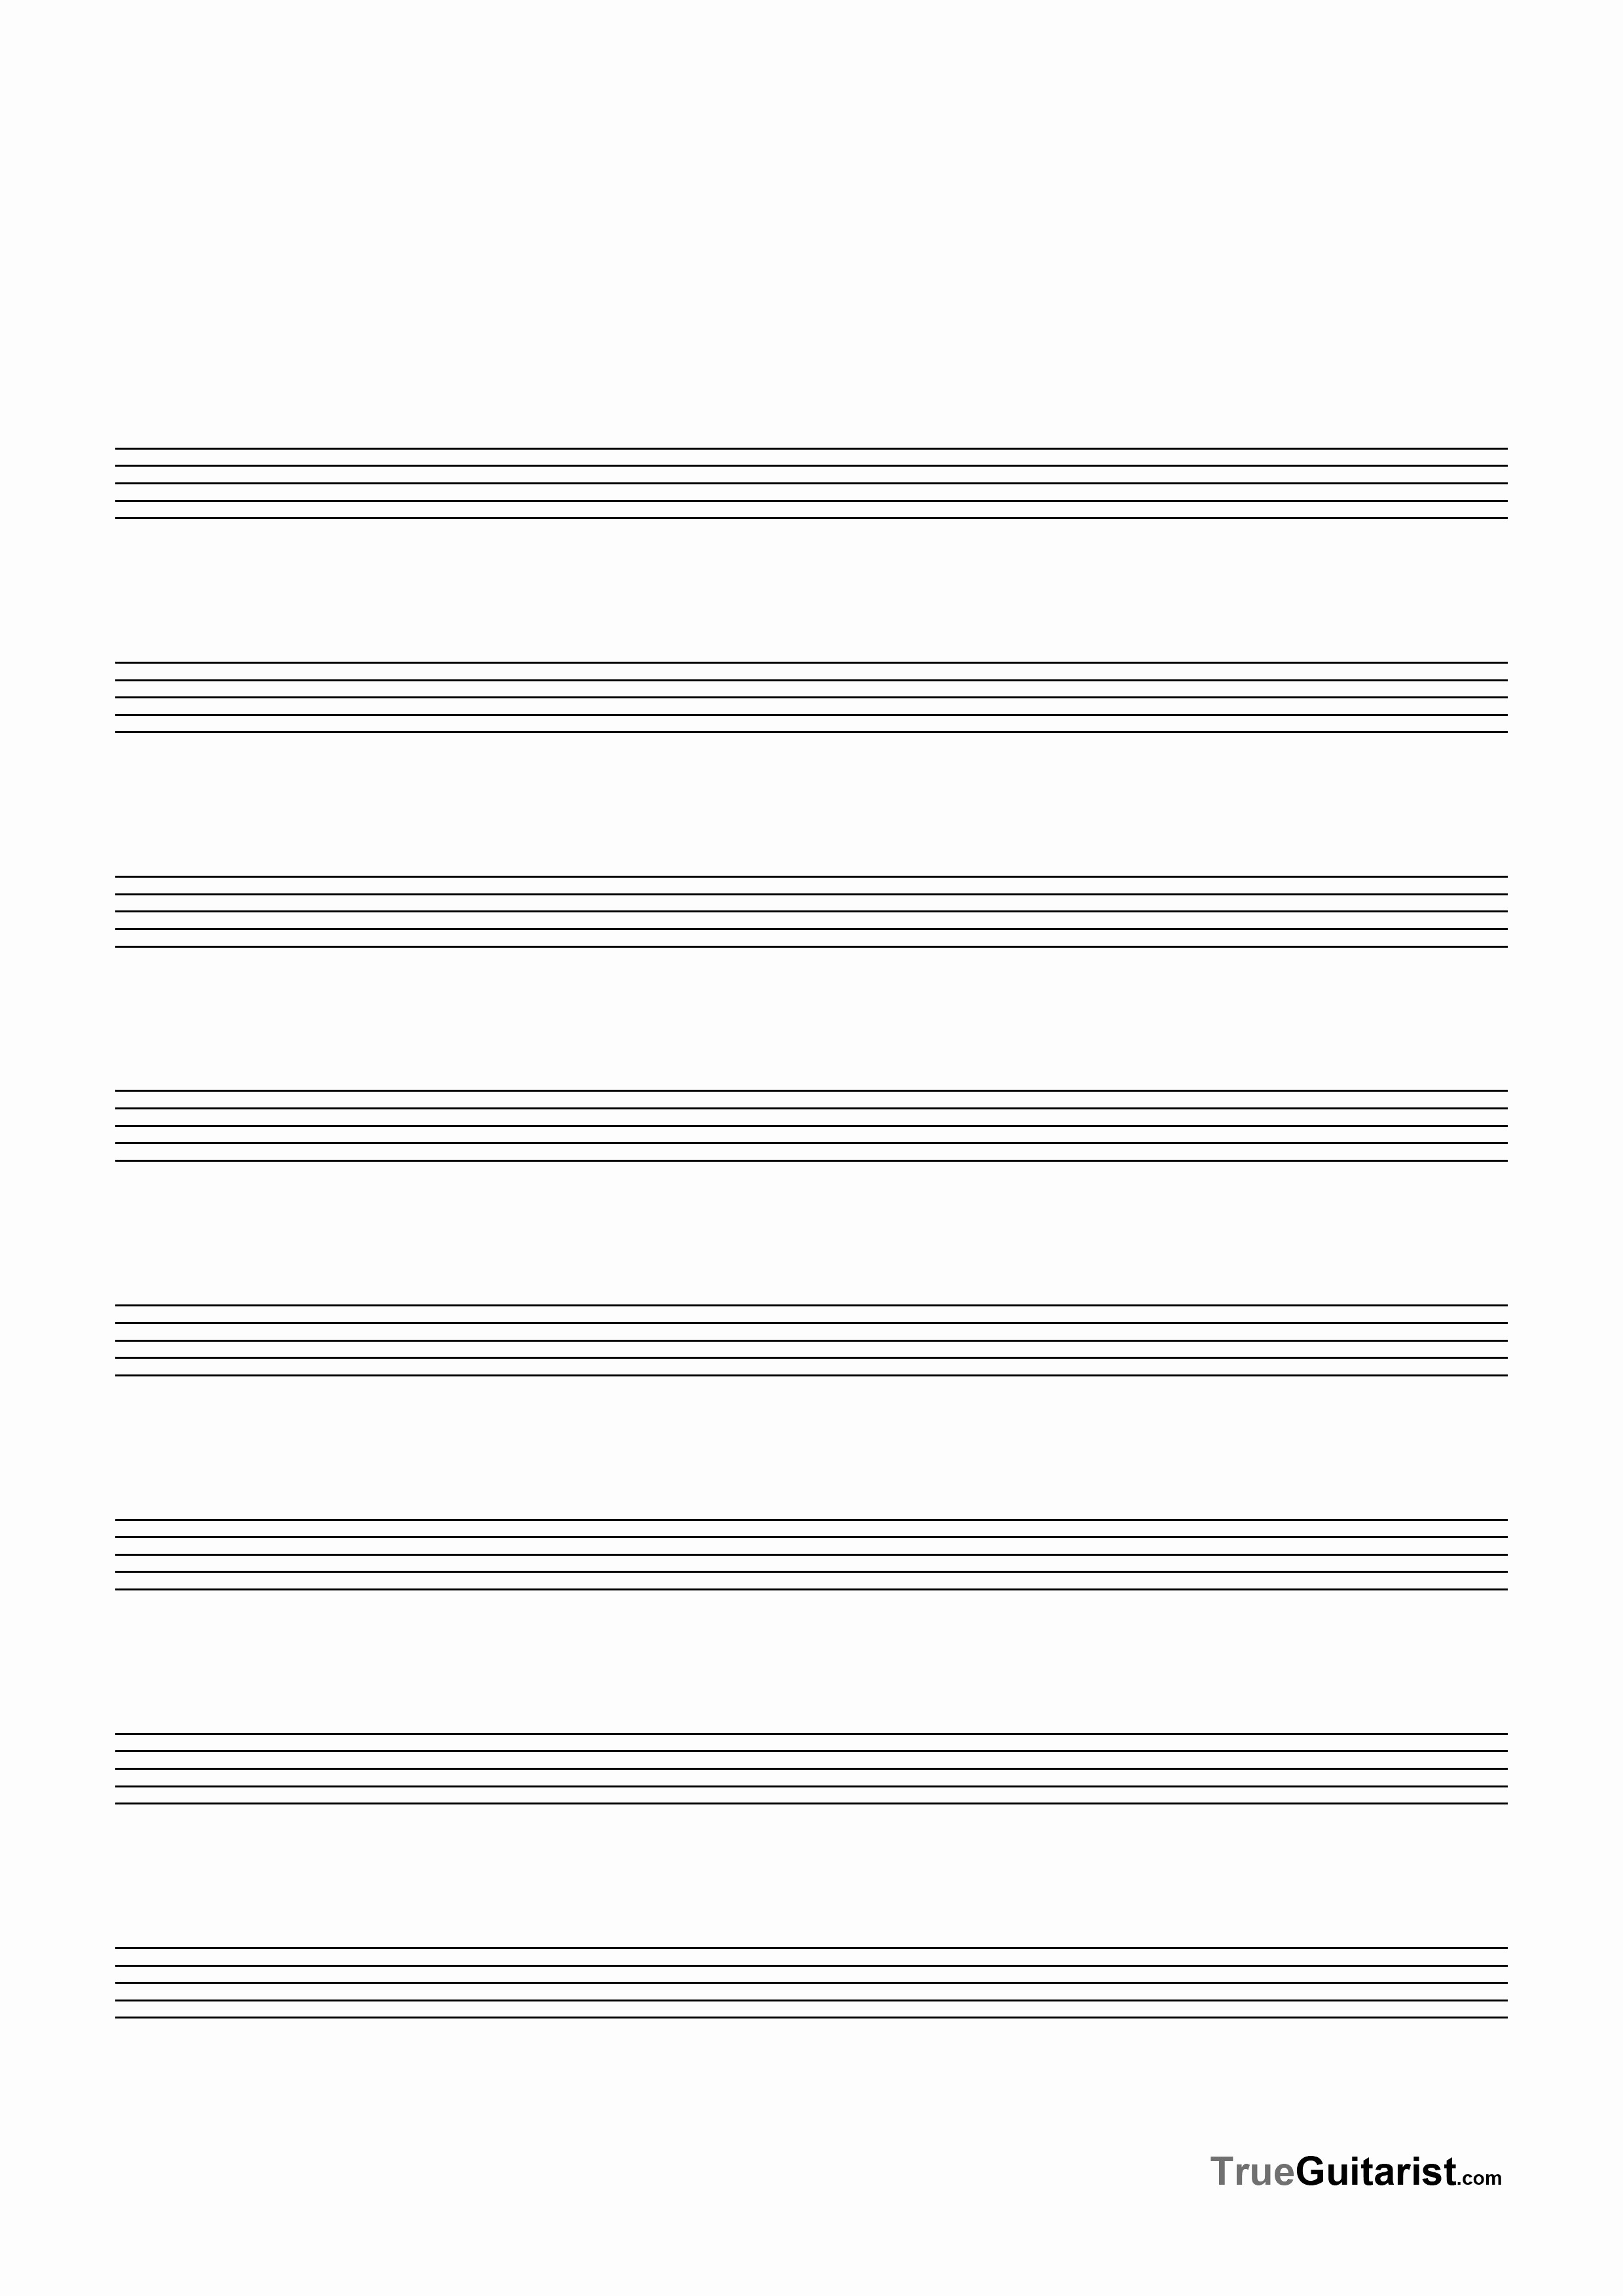 Blank Treble Clef Staff Paper Awesome Blank Treble Clef Staff Paper Pdf Luxury Blank Sheet Music